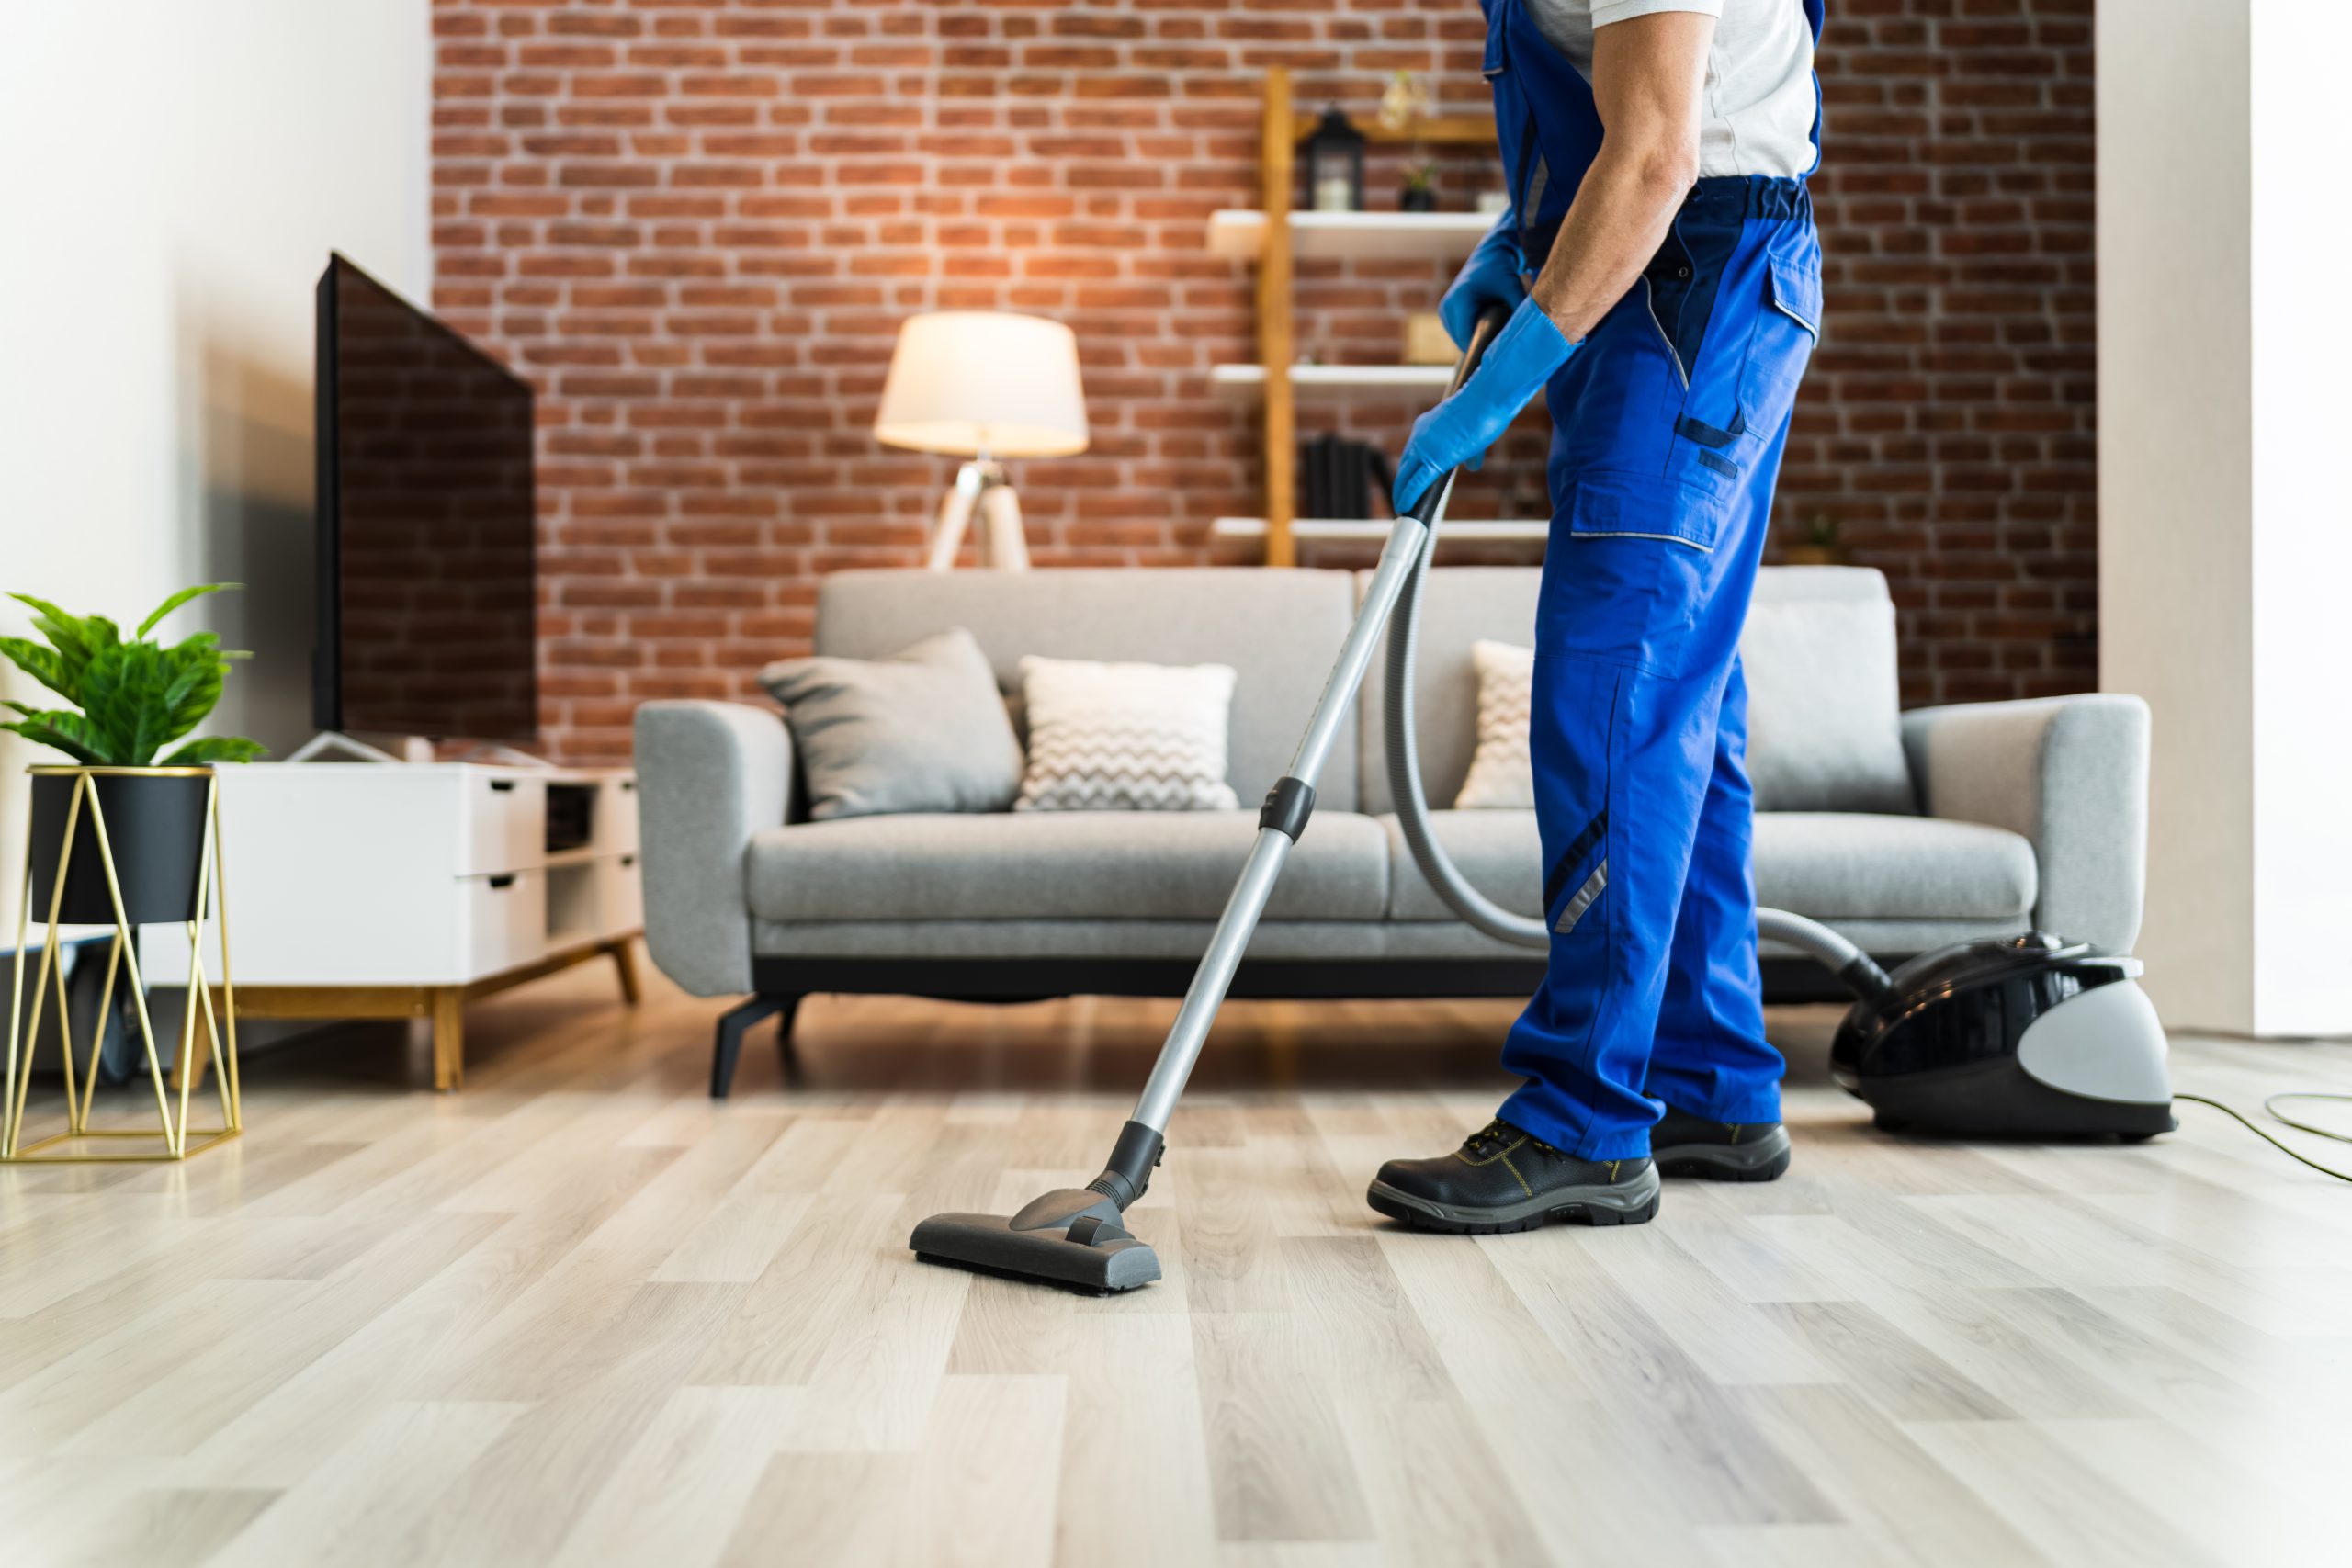 How often should I have my home cleaned by a cleaning service?